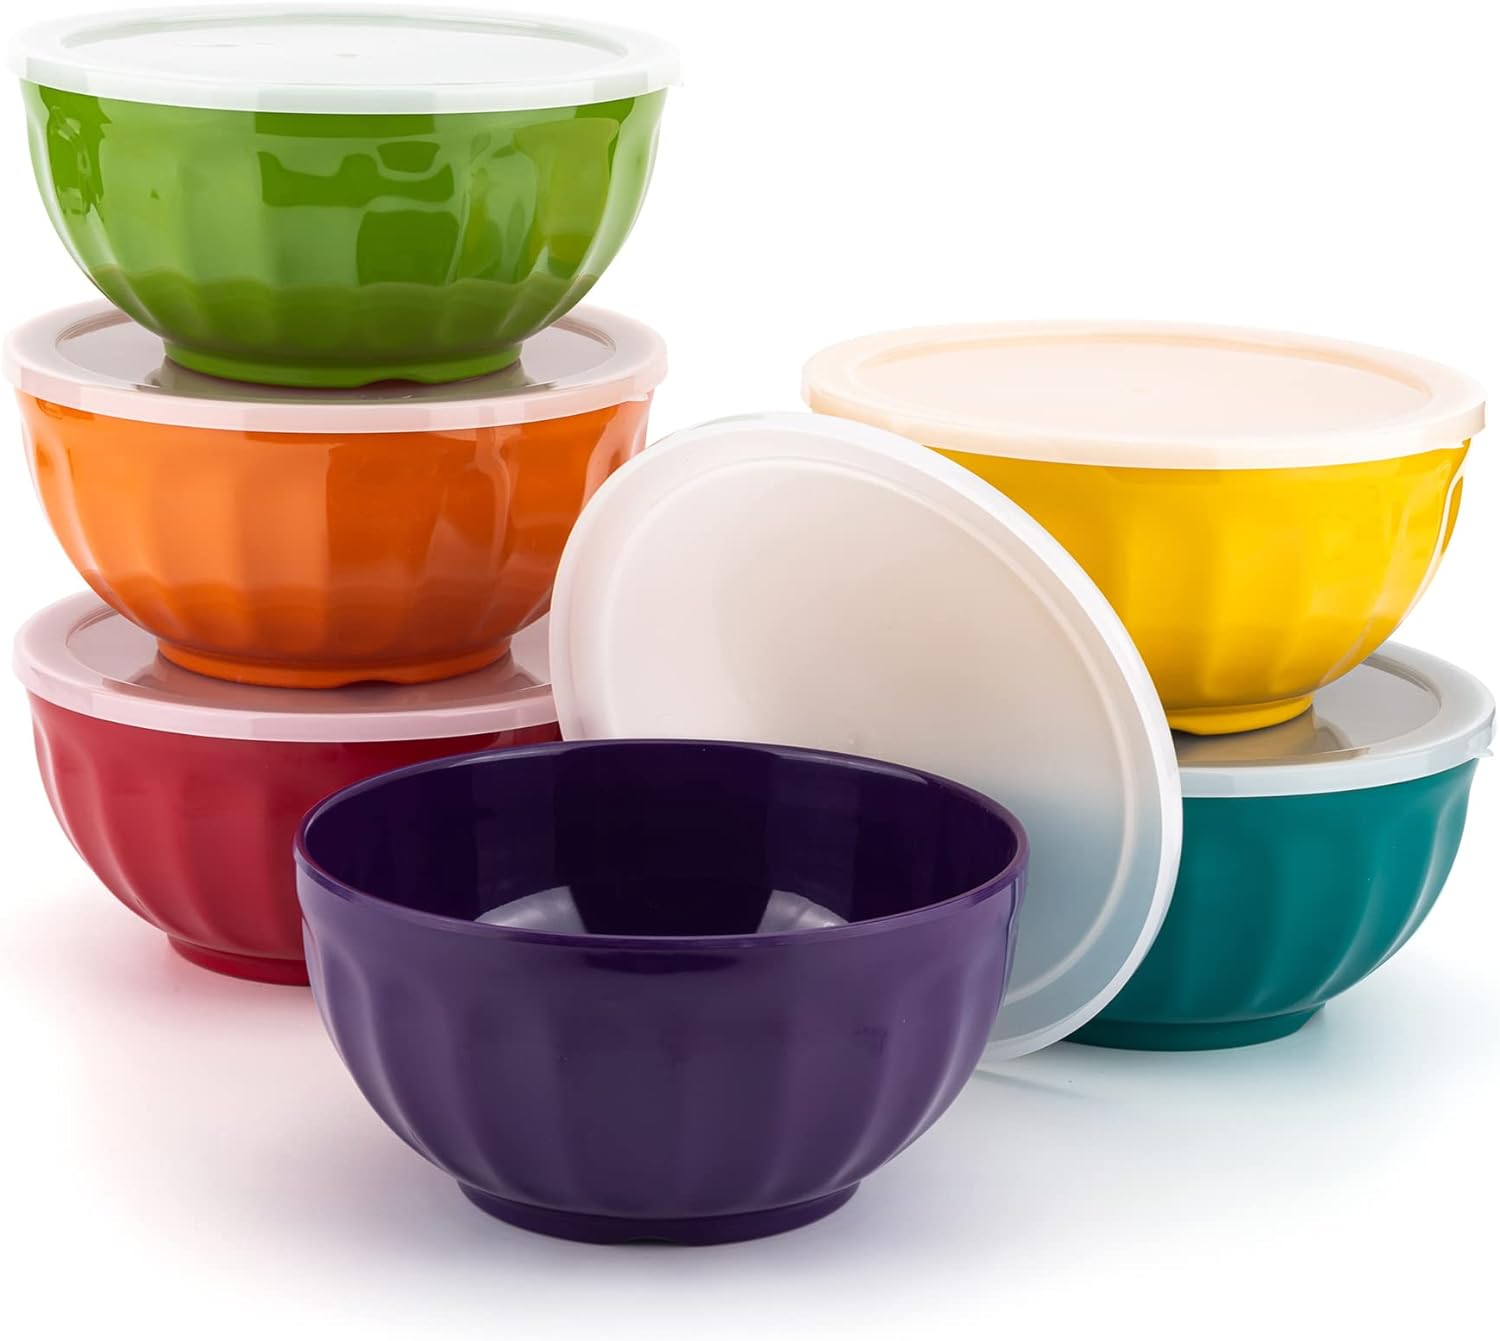 lok-osemile melamine mixing bowls with lids - 12 piece nesting bowls set 6  bowls and 6